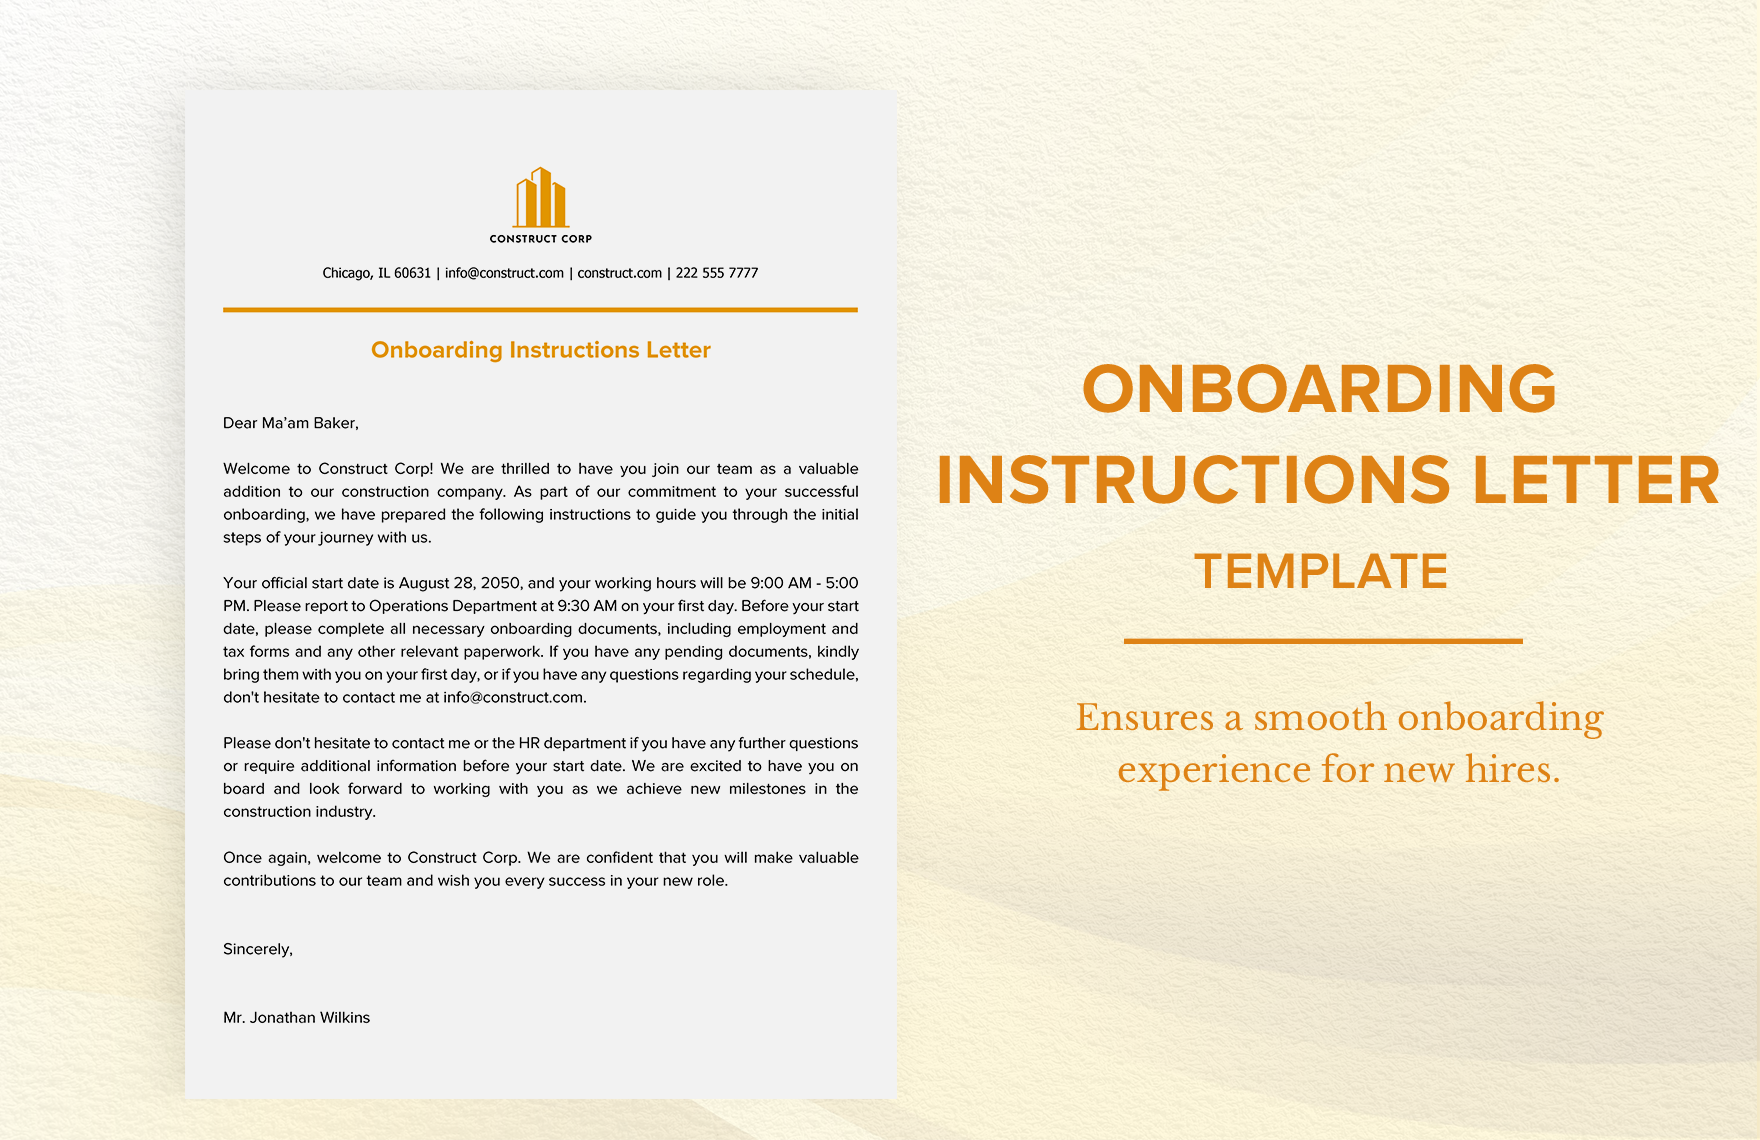 Onboarding Instructions Letter Template